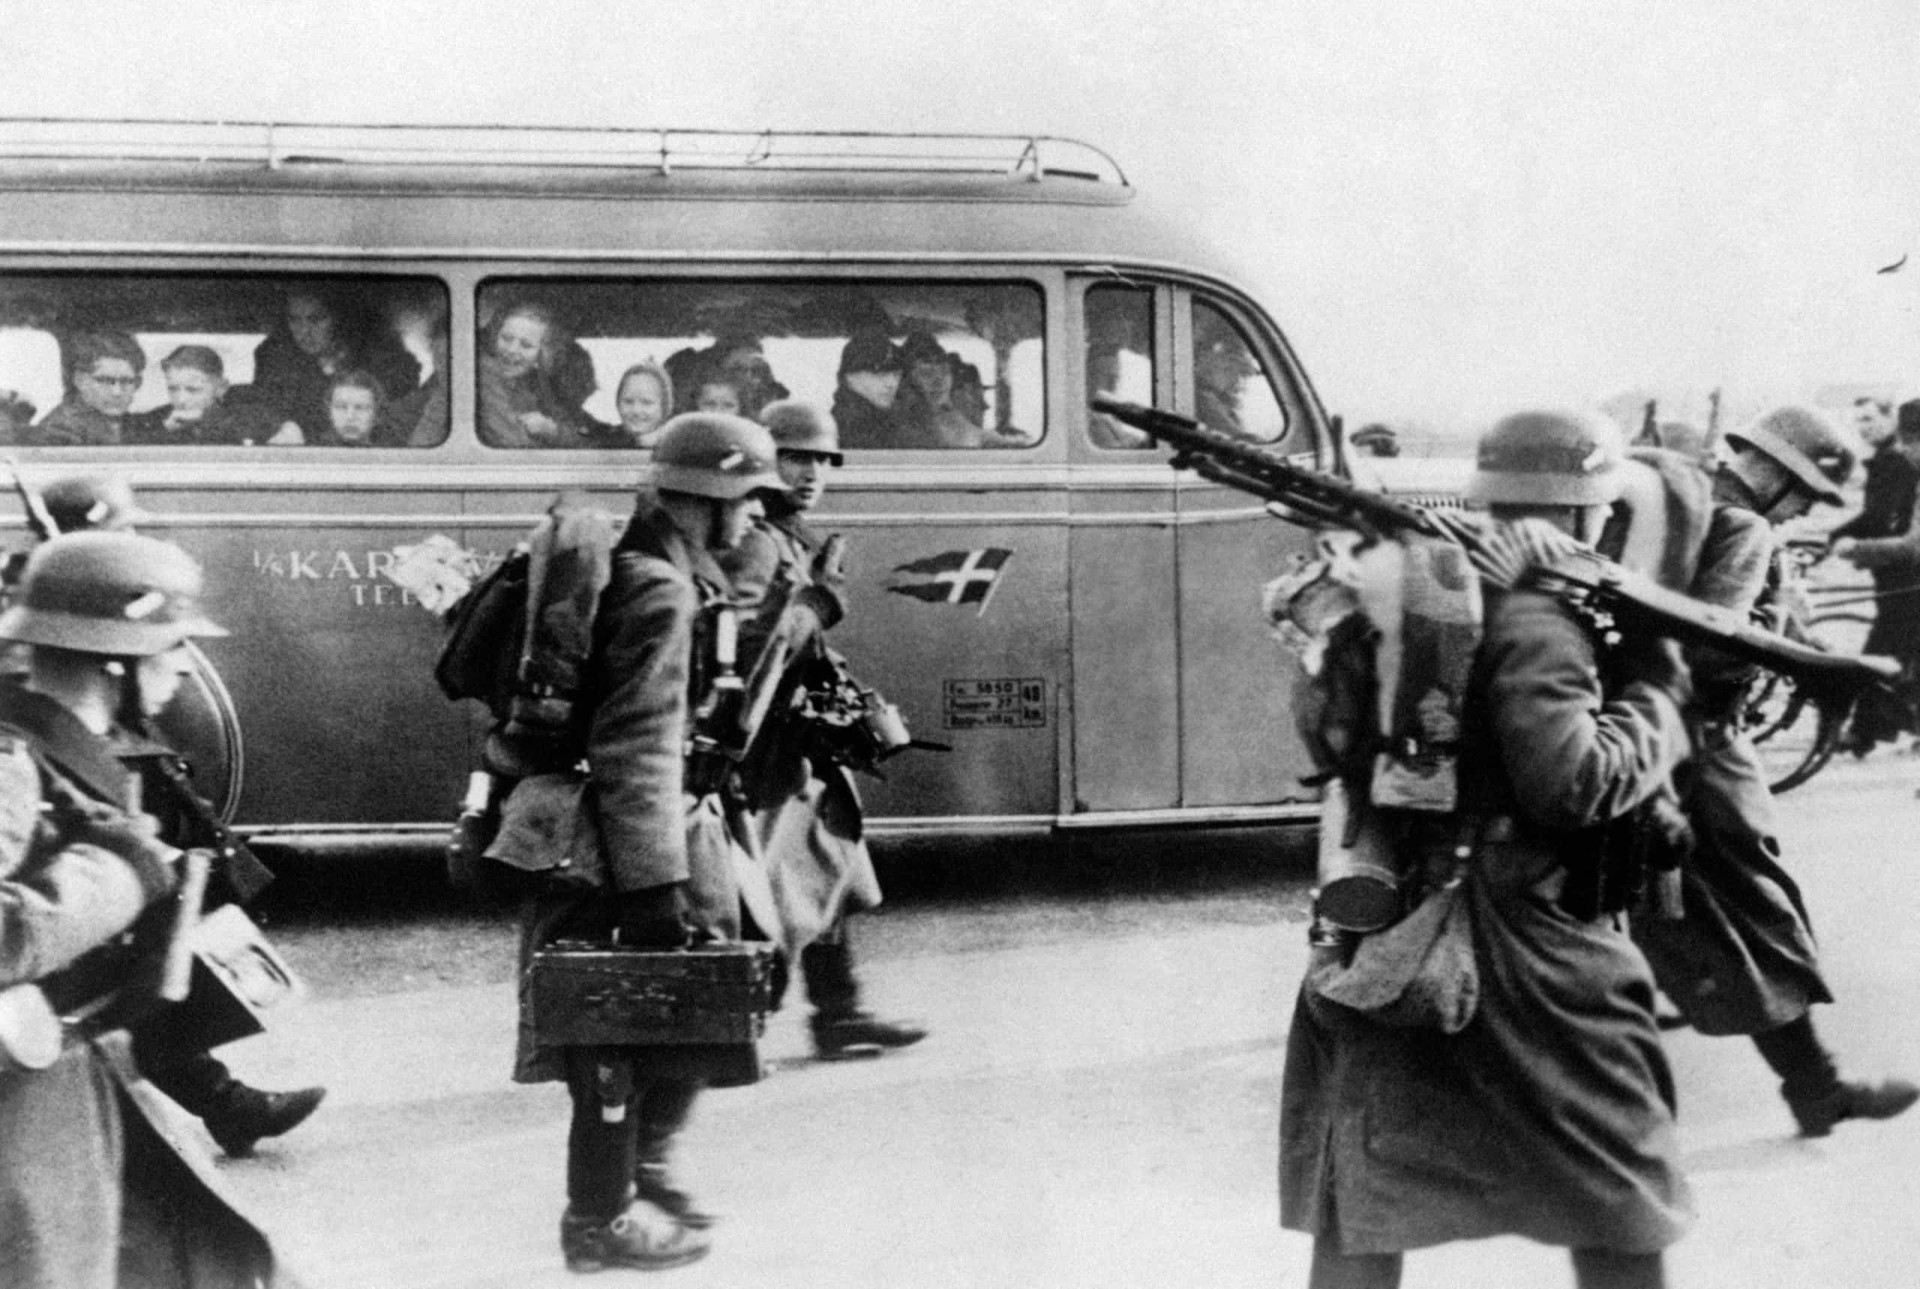 <p>On April 9, a group of German infantry soldiers was overtaken by a bus while heading towards the Danish capital. This offensive against Denmark violated the non-aggression agreement the country had entered into with Germany less than a year earlier.</p><p><a href="https://www.msn.com/en-my/community/channel/vid-7xx8mnucu55yw63we9va2gwr7uihbxwc68fxqp25x6tg4ftibpra?cvid=94631541bc0f4f89bfd59158d696ad7e">Follow us and access great exclusive content every day</a></p>